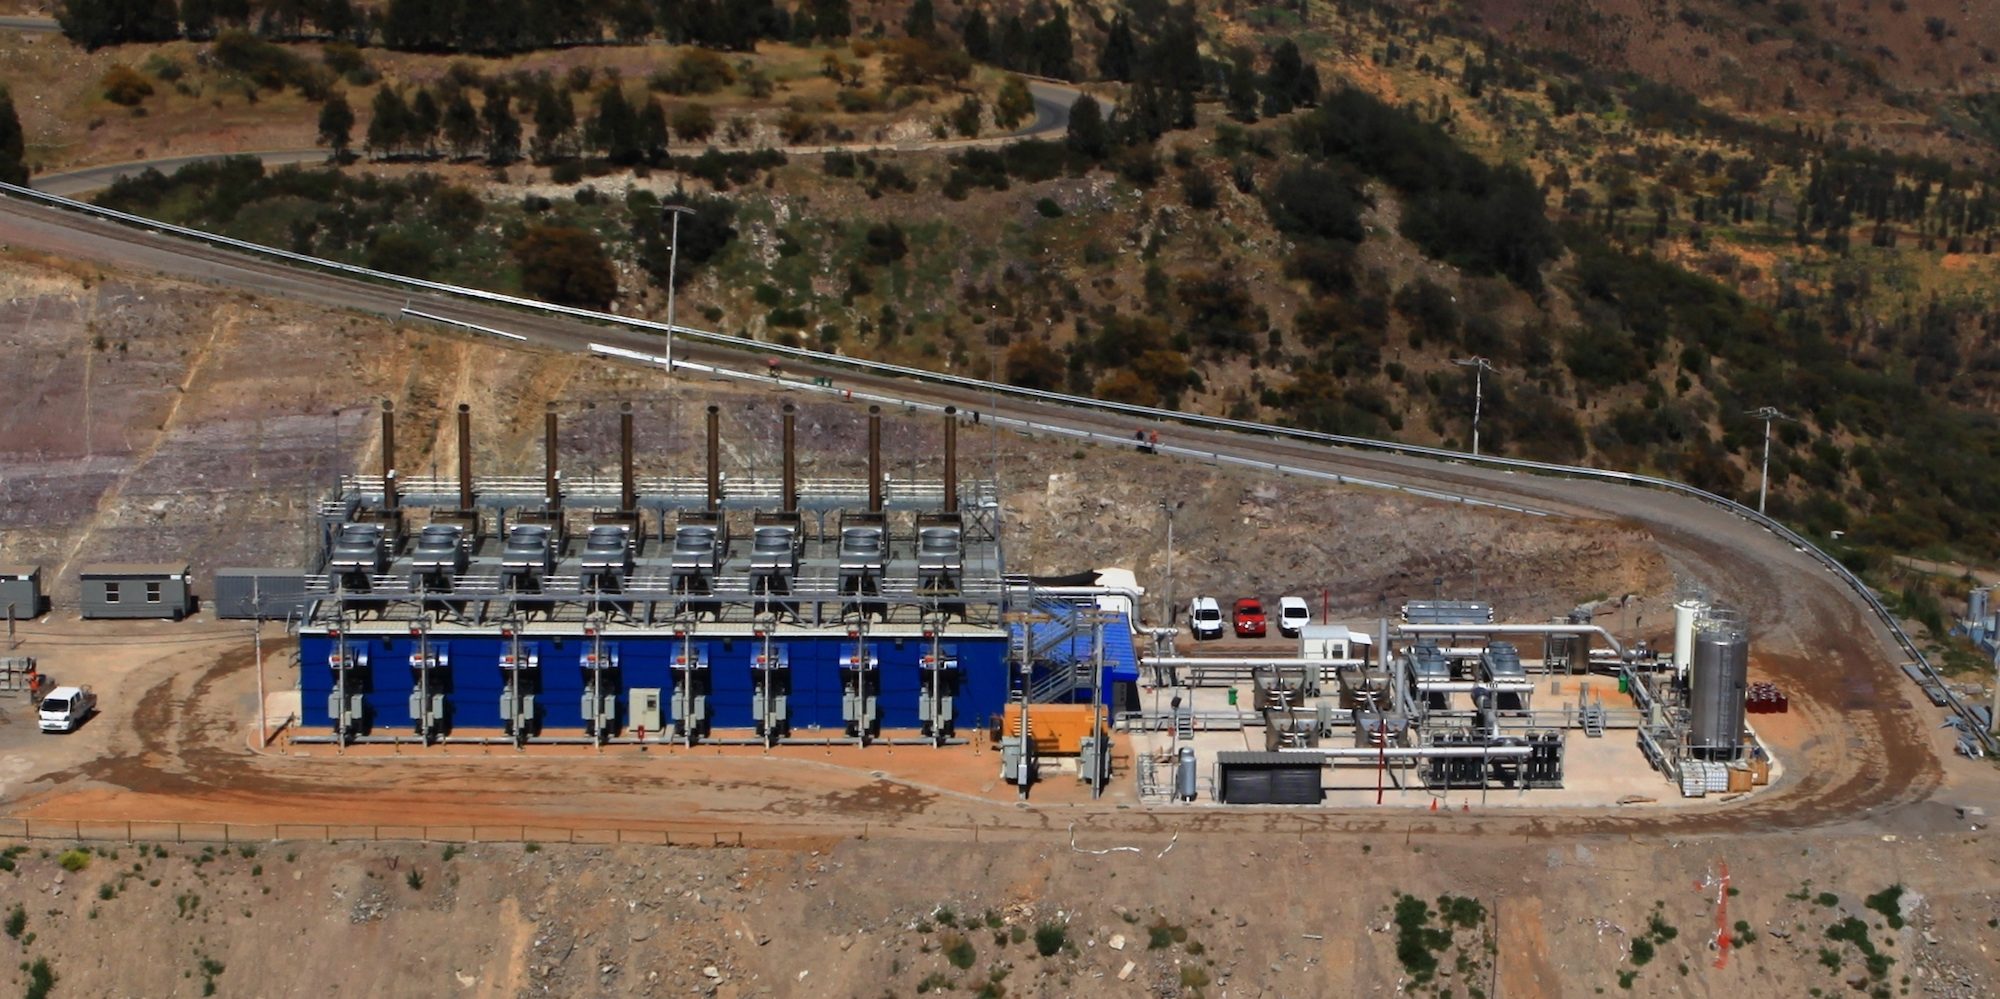 Landfill Gas to Energy project in Chile